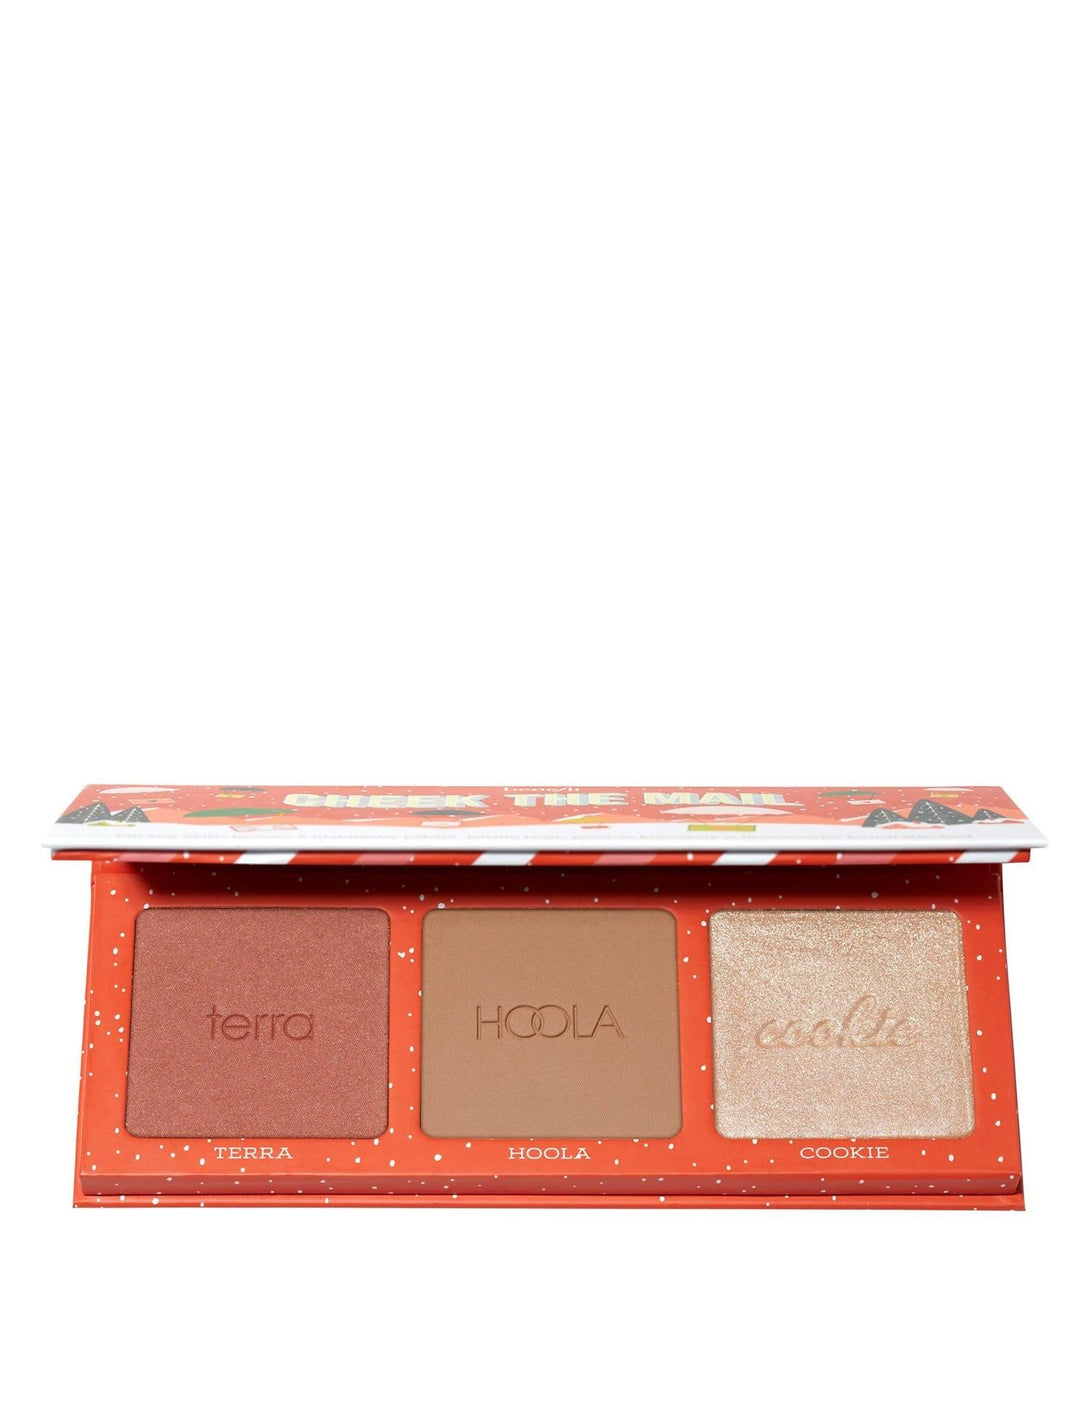 Benefit Cosmetics Cheek the Mail Cosmetic Holic